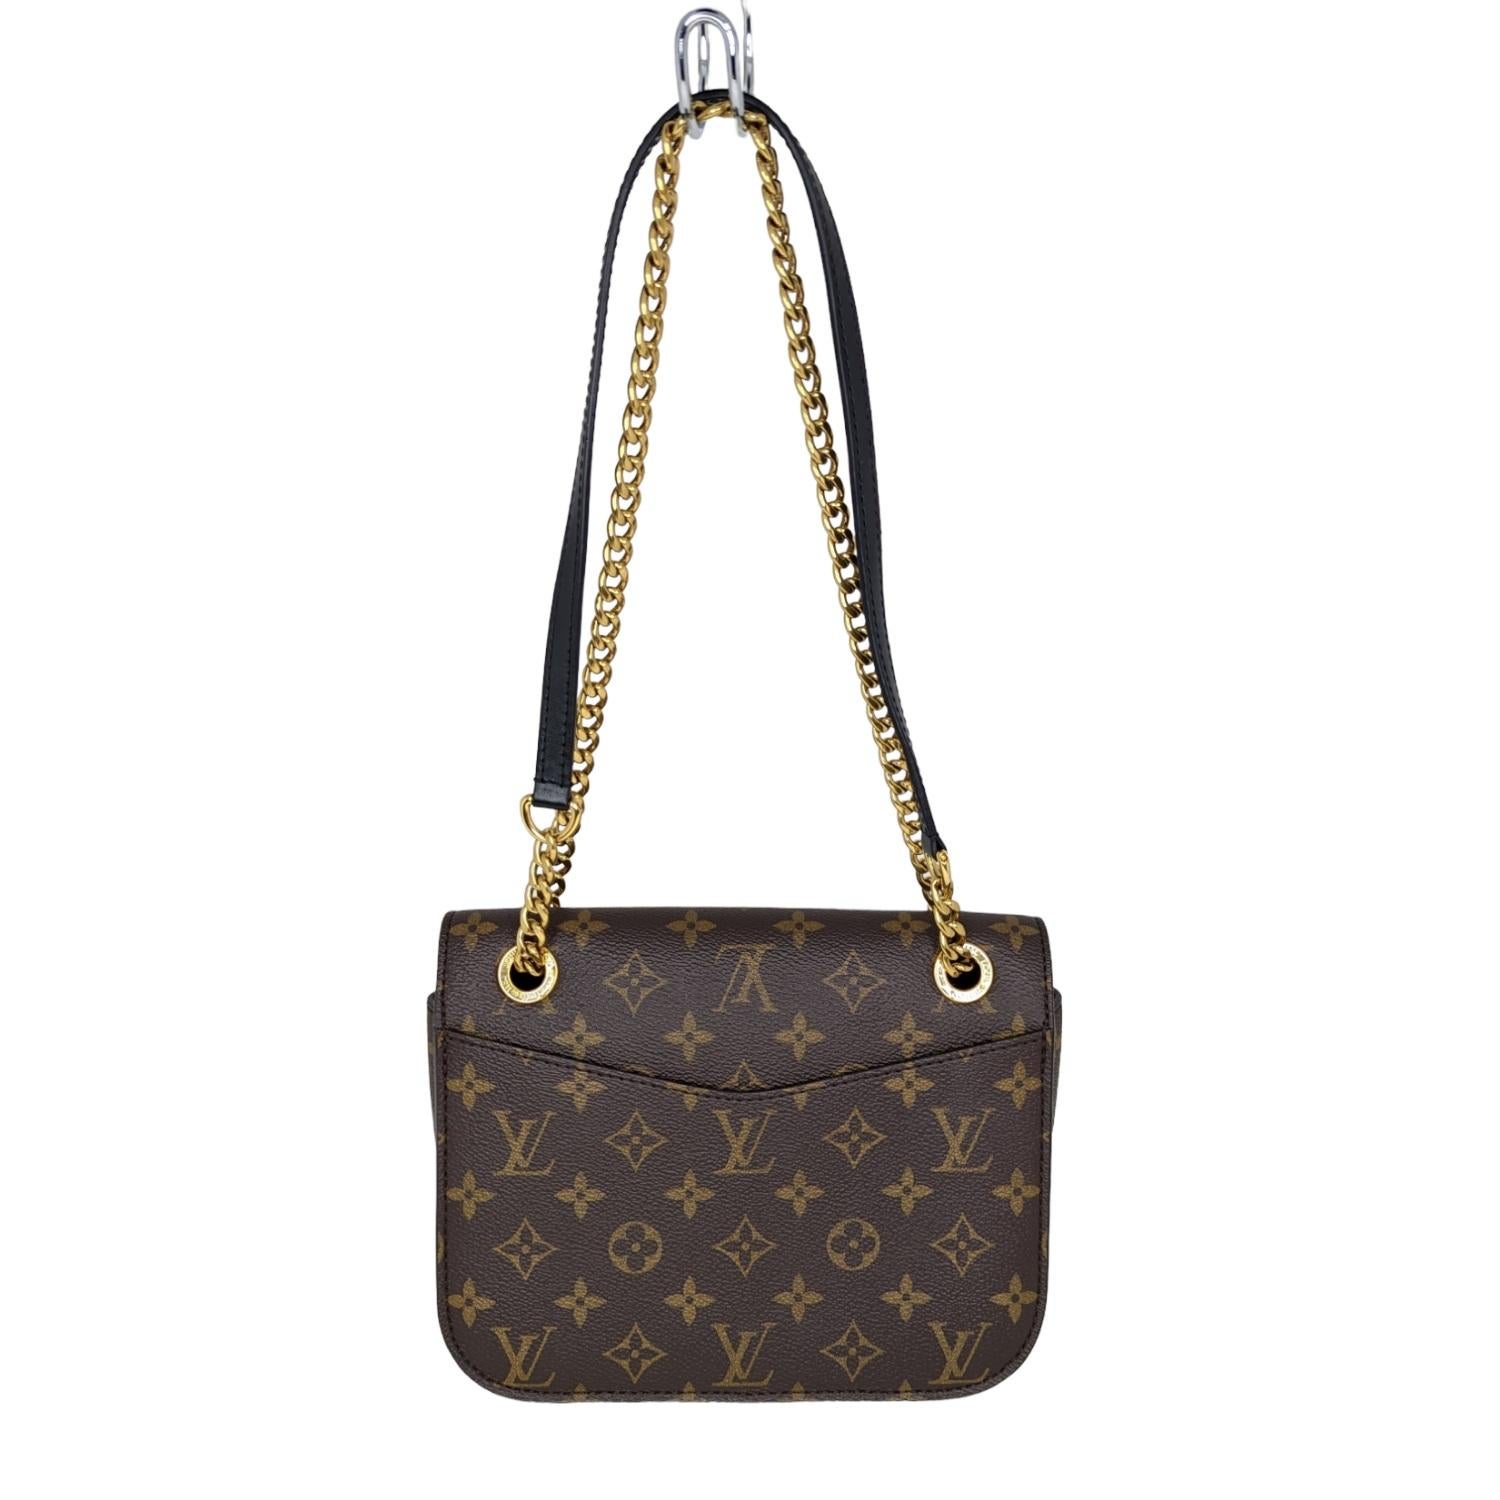 This handbag is crafted of classic Louis Vuitton monogram toile dark brown canvas. The bag features a gold chain shoulder strap with a black leather shoulder pad, a black and gold 